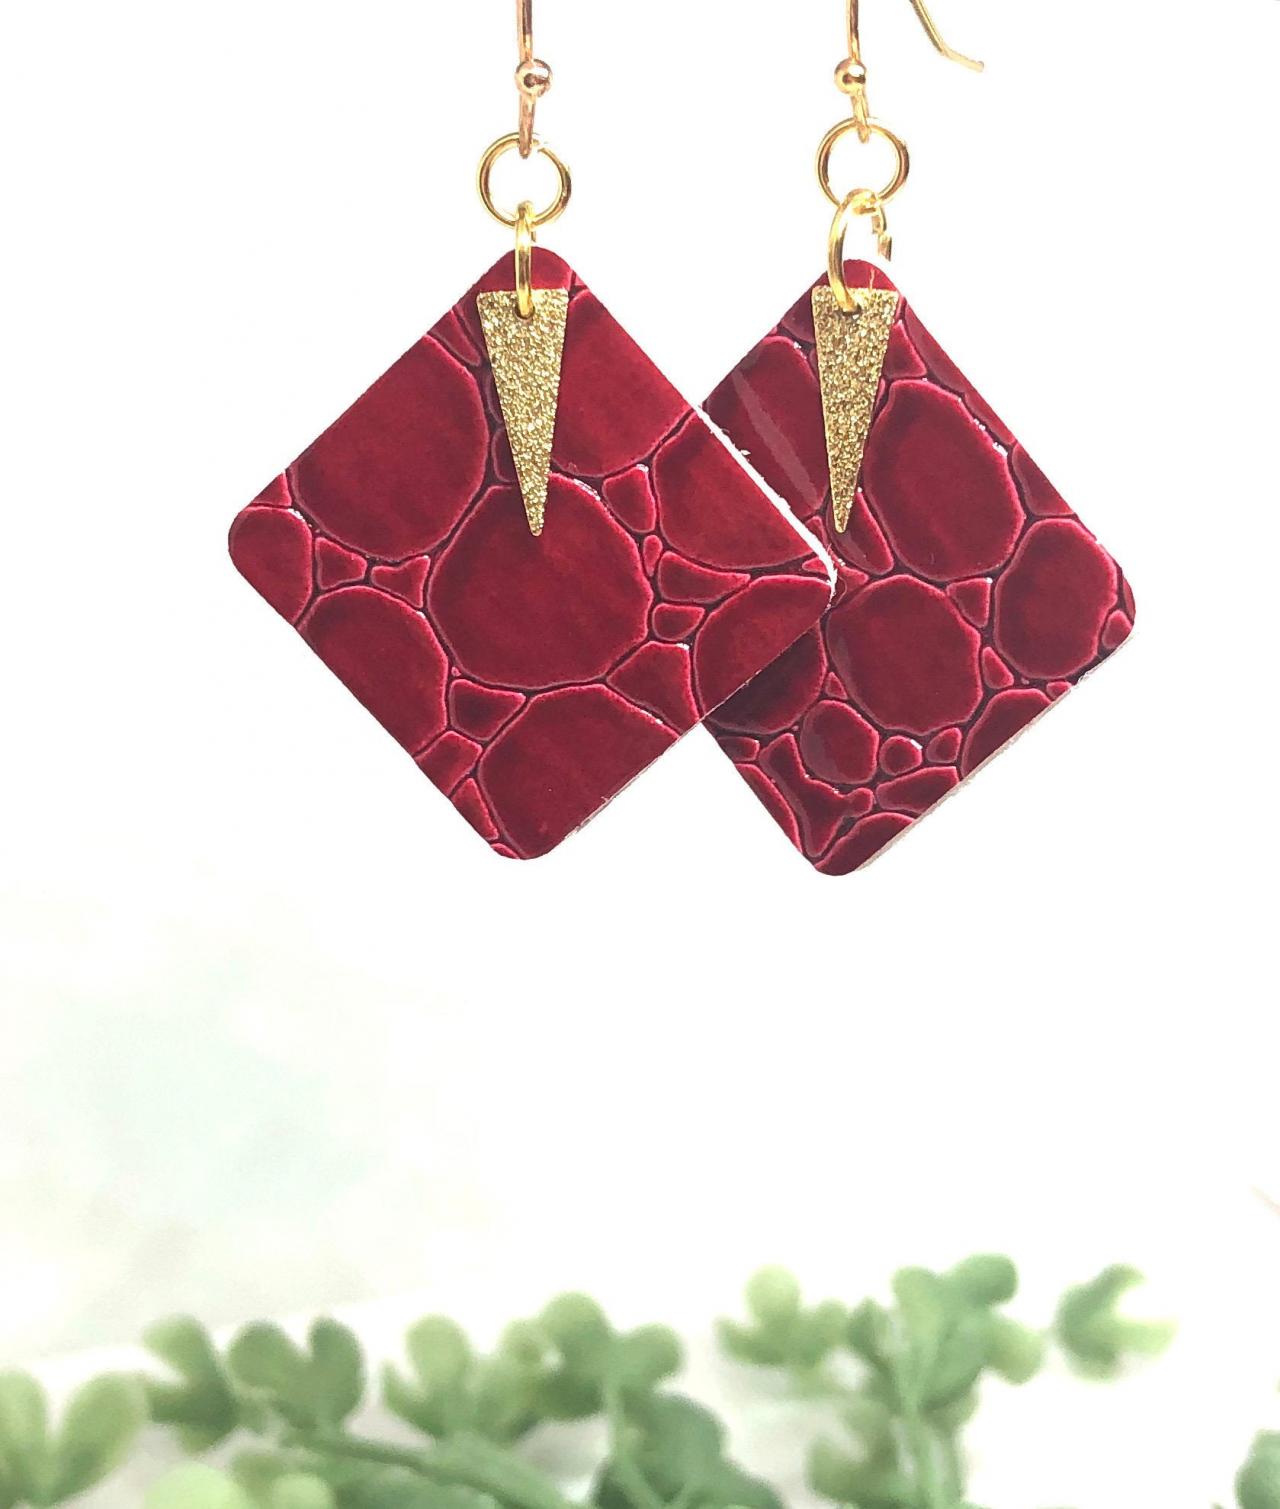 Faux Leather Square Earrings, Red Crocodile, Gold Hammered Spear Pendant, Double-sided, Dangle Earrings, Lightweight.